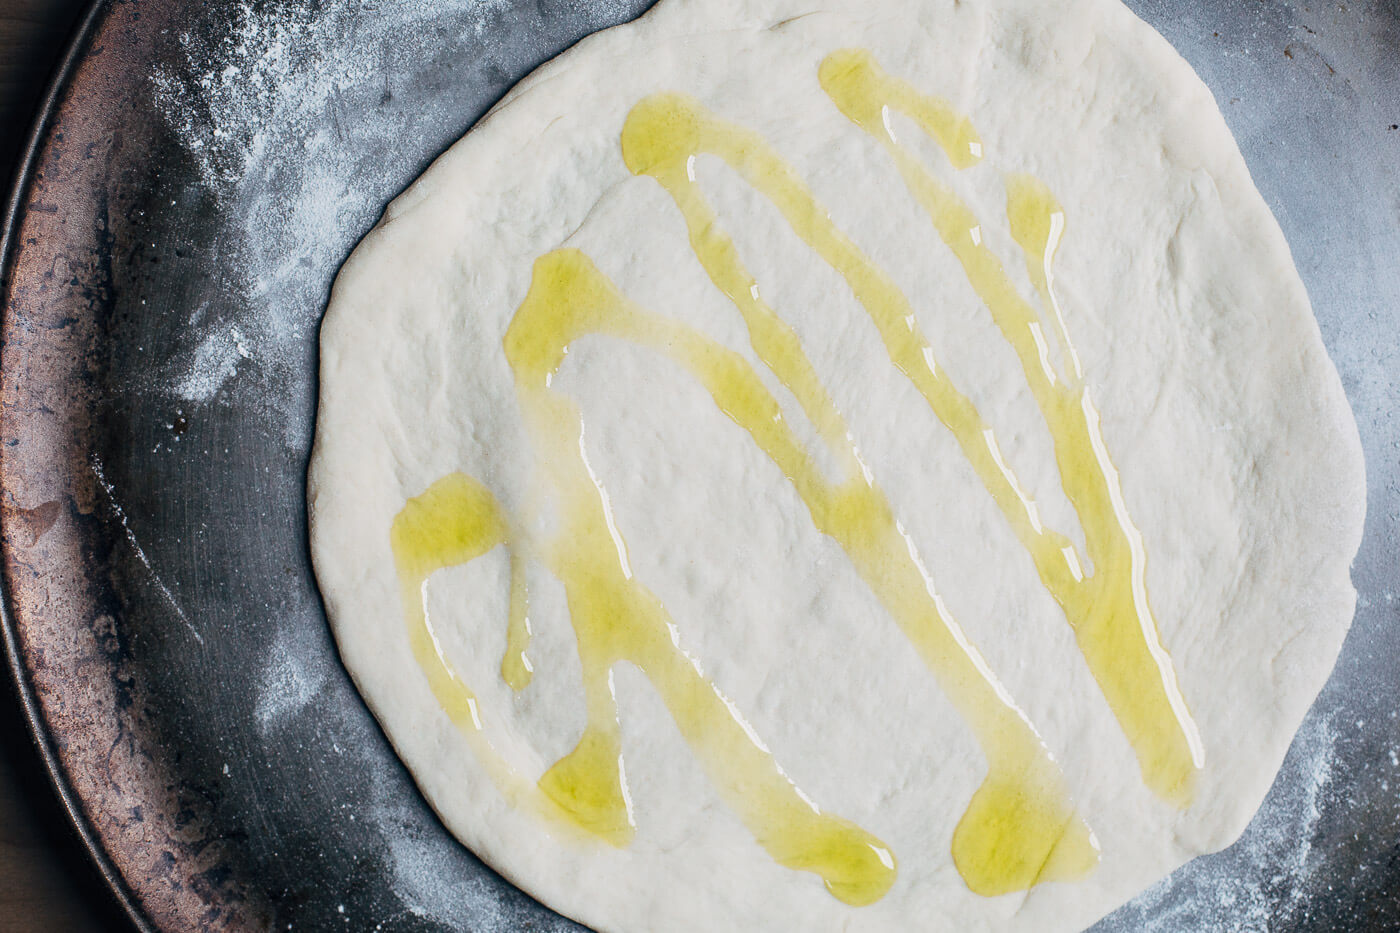 Pizza dough with a drizzle of olive oil.